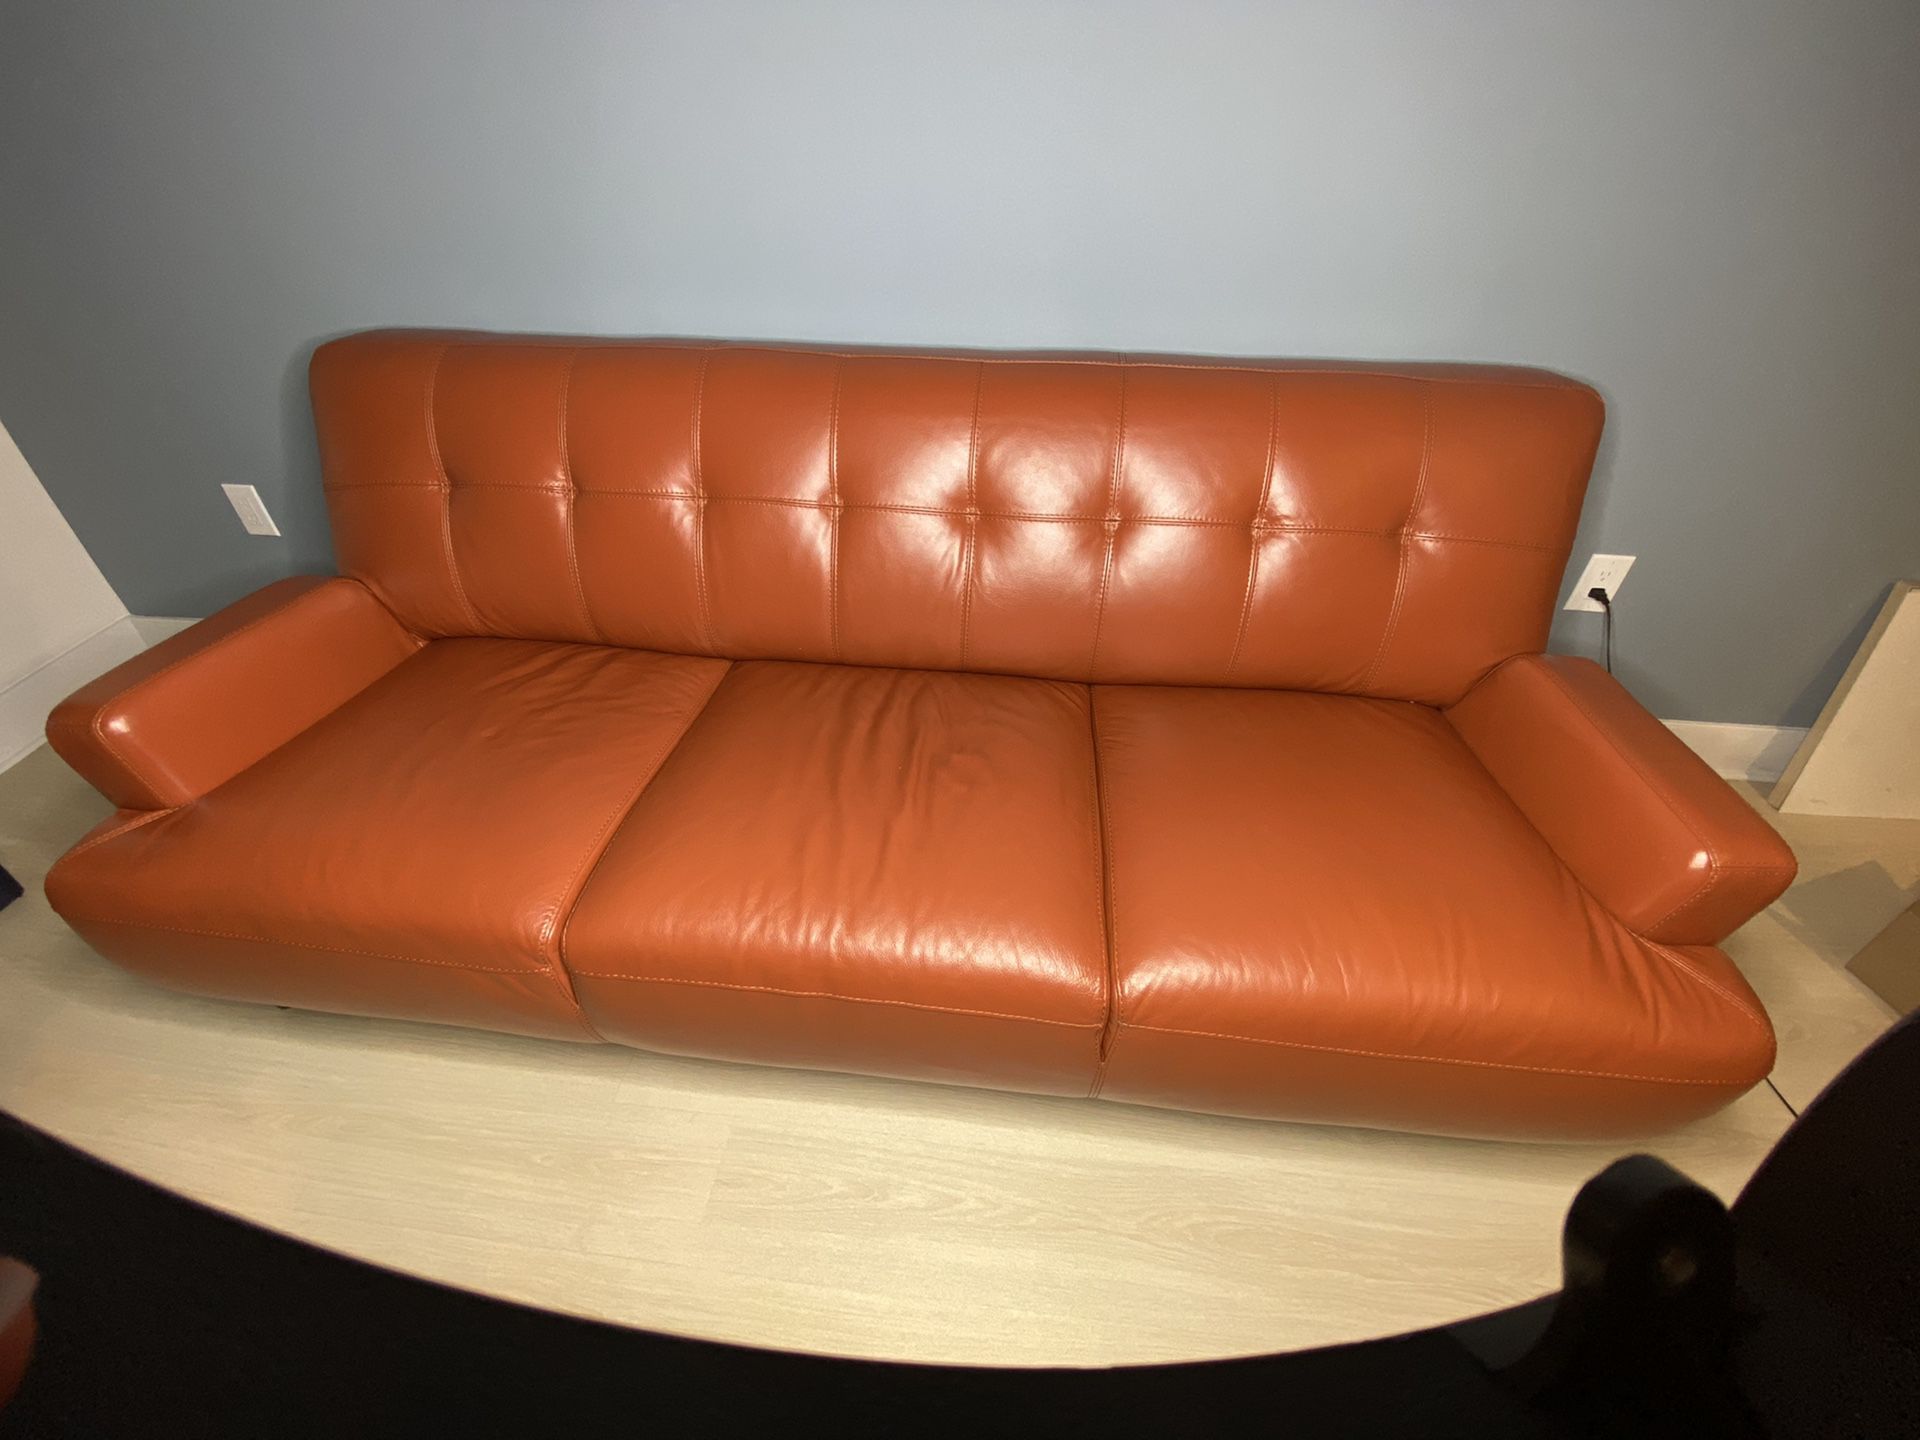 Geniune leather couch